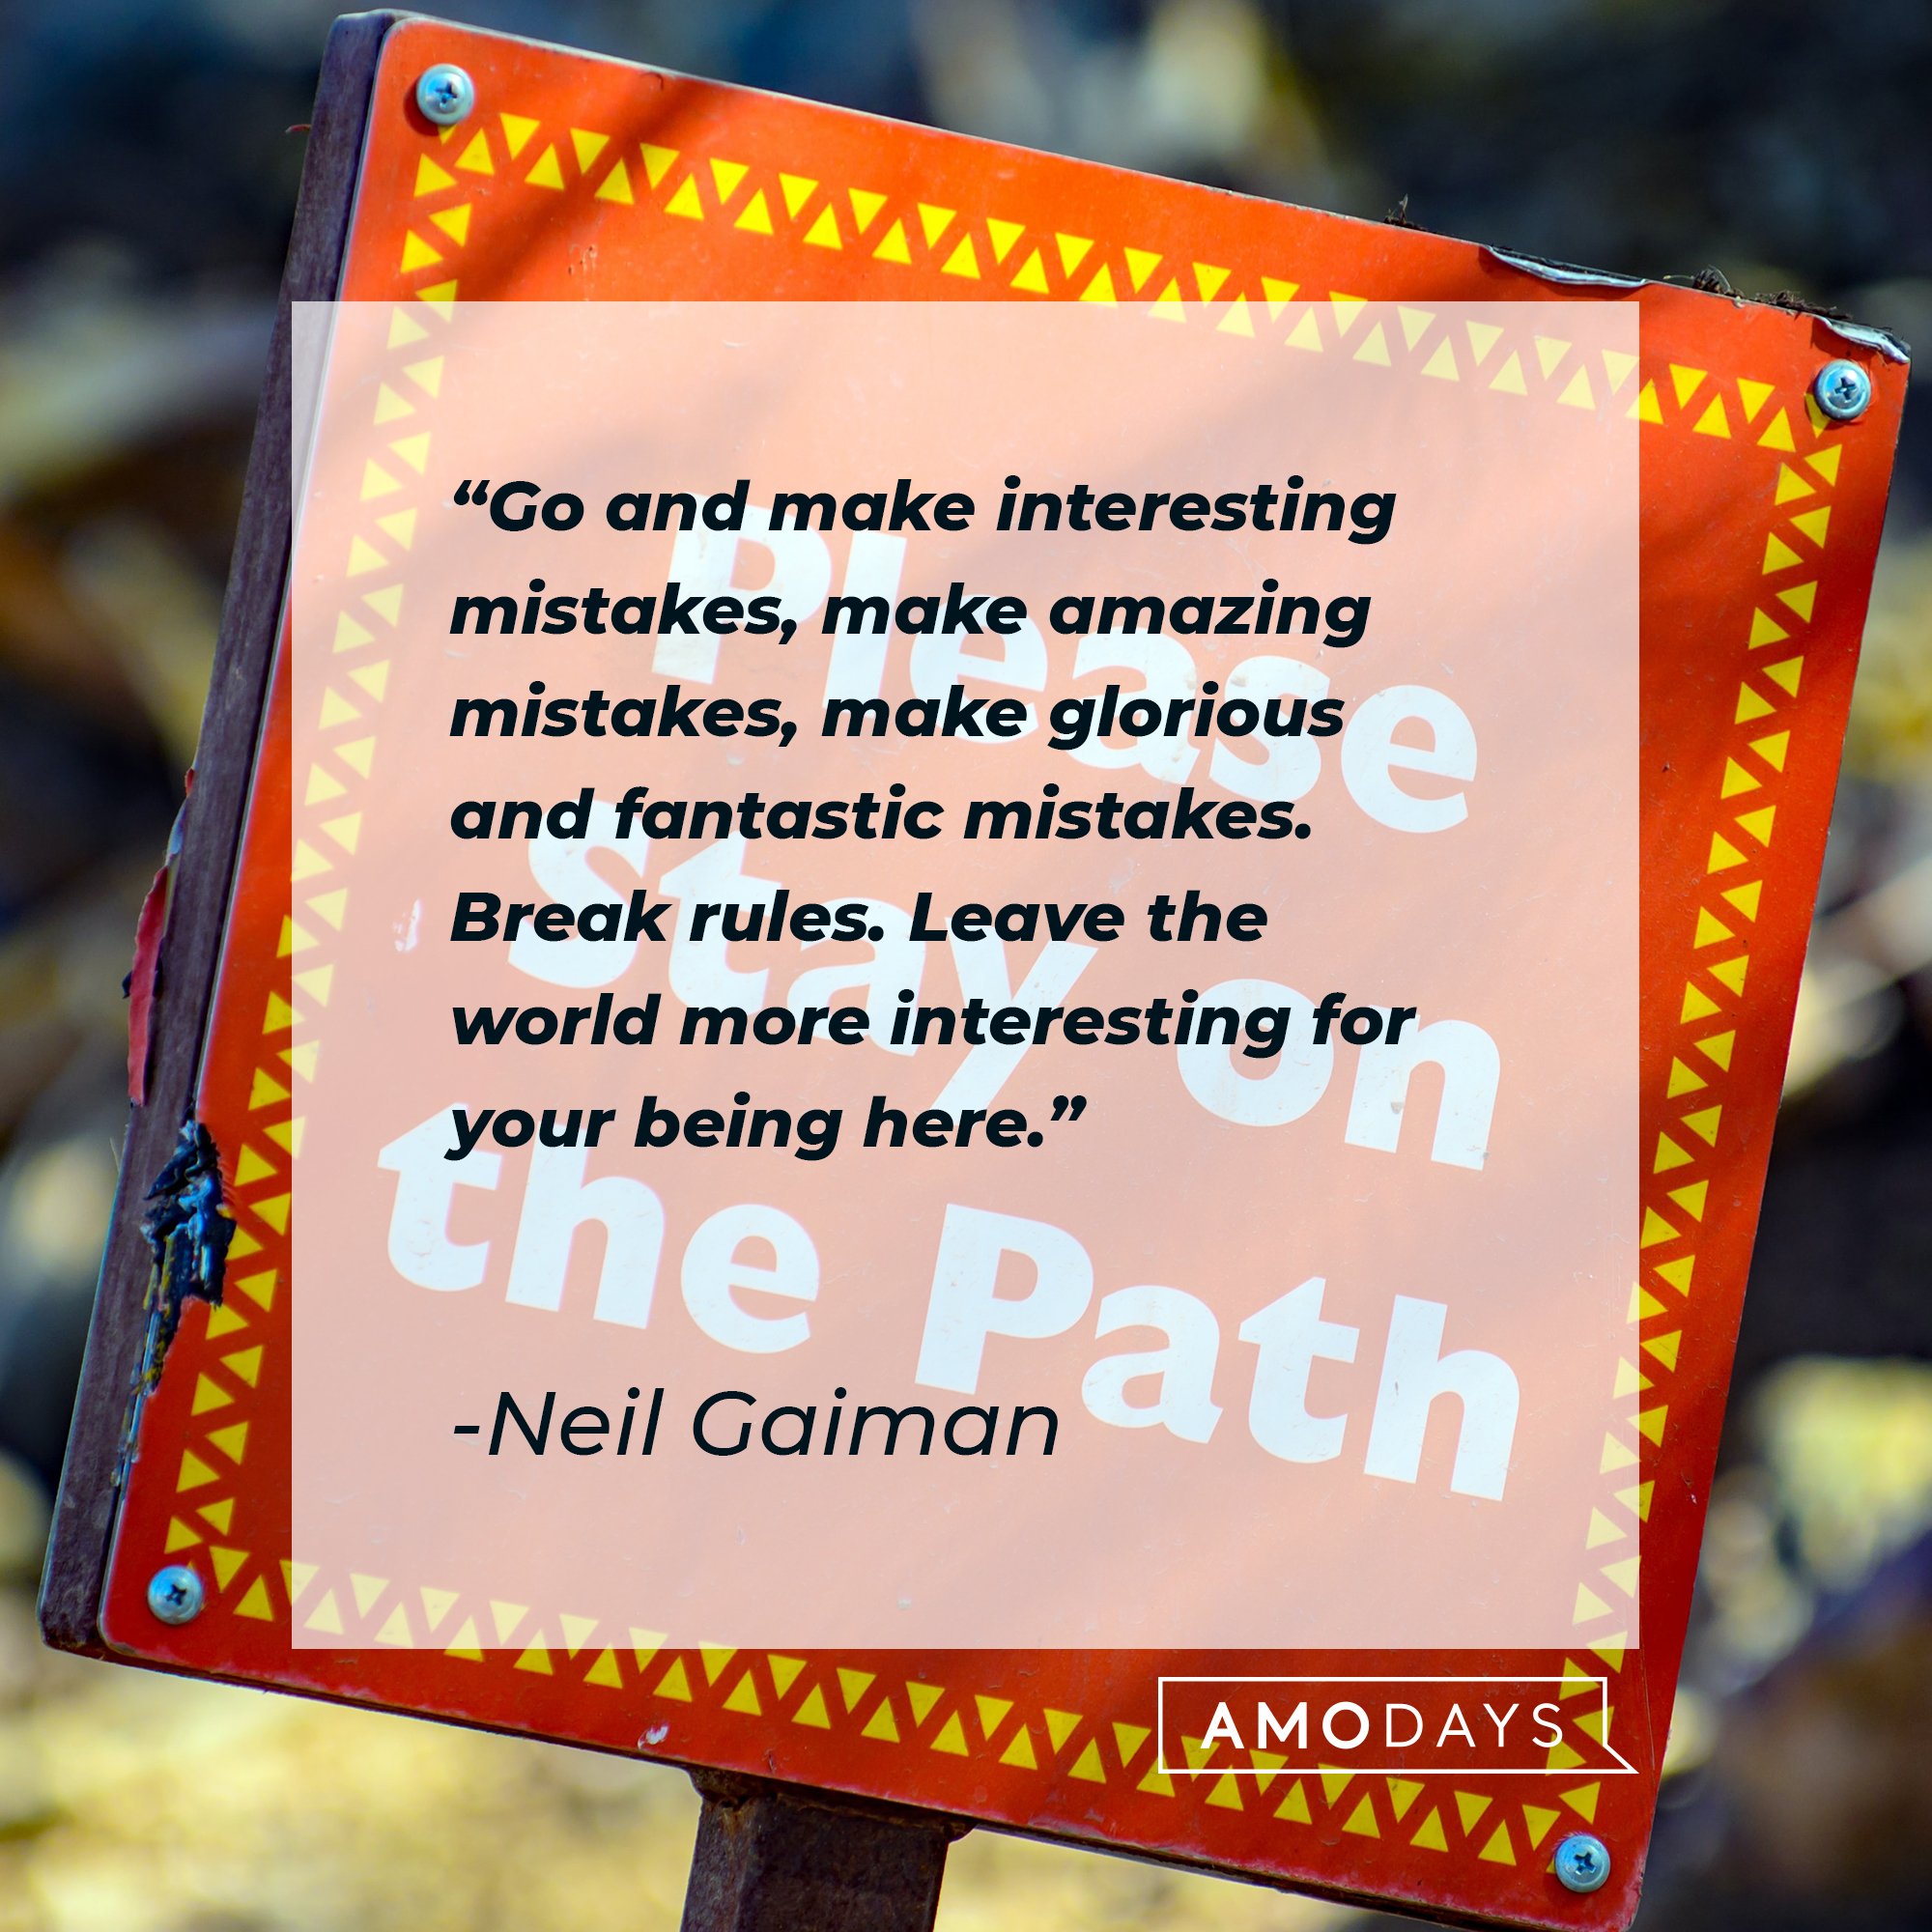 Neil Gaiman’s quote: "Go and make interesting mistakes, make amazing mistakes, make glorious and fantastic mistakes. Break rules. Leave the world more interesting for your being here." | Image: AmoDays